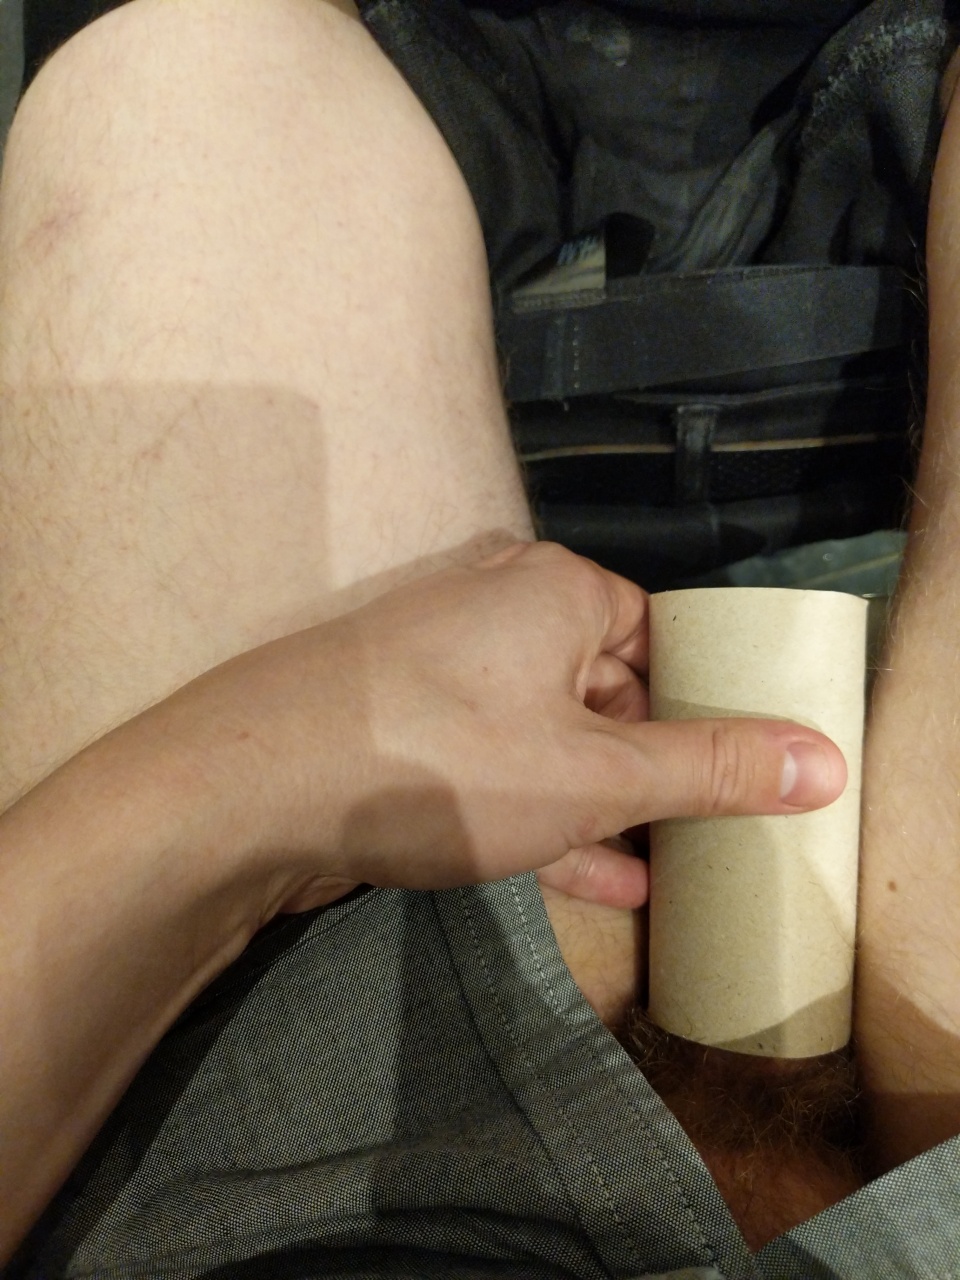 Toilet Paper Roll Test Question